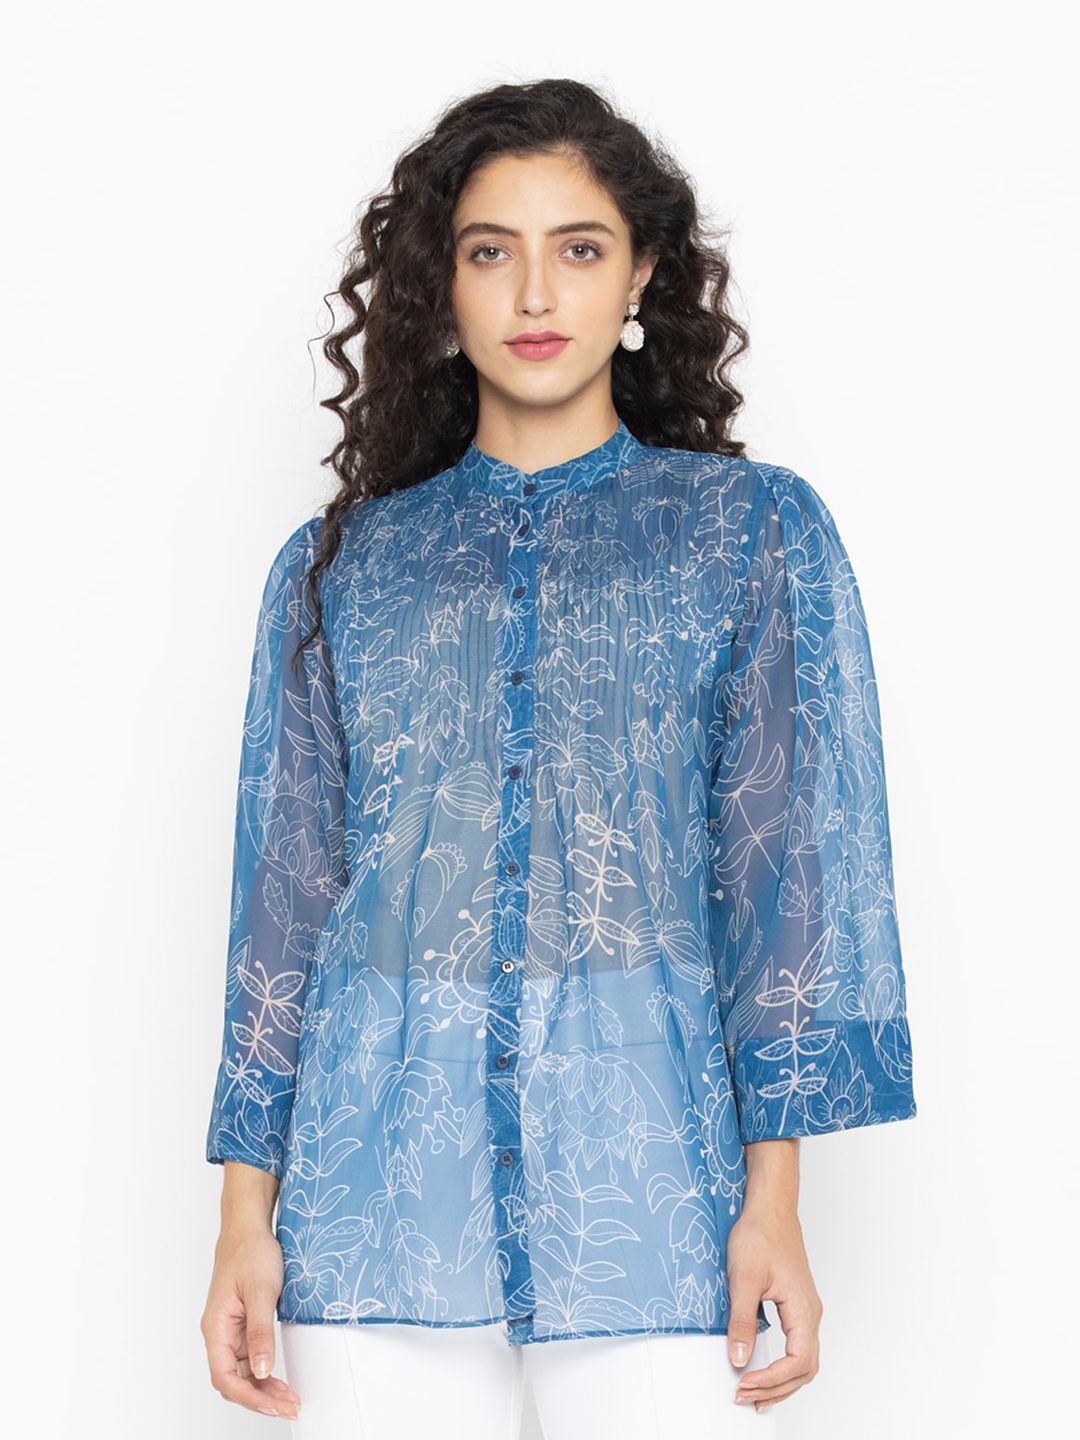 OCTICS Blue & Beige Floral Print Mandarin Collar Georgette Shirt Style Top Price in India